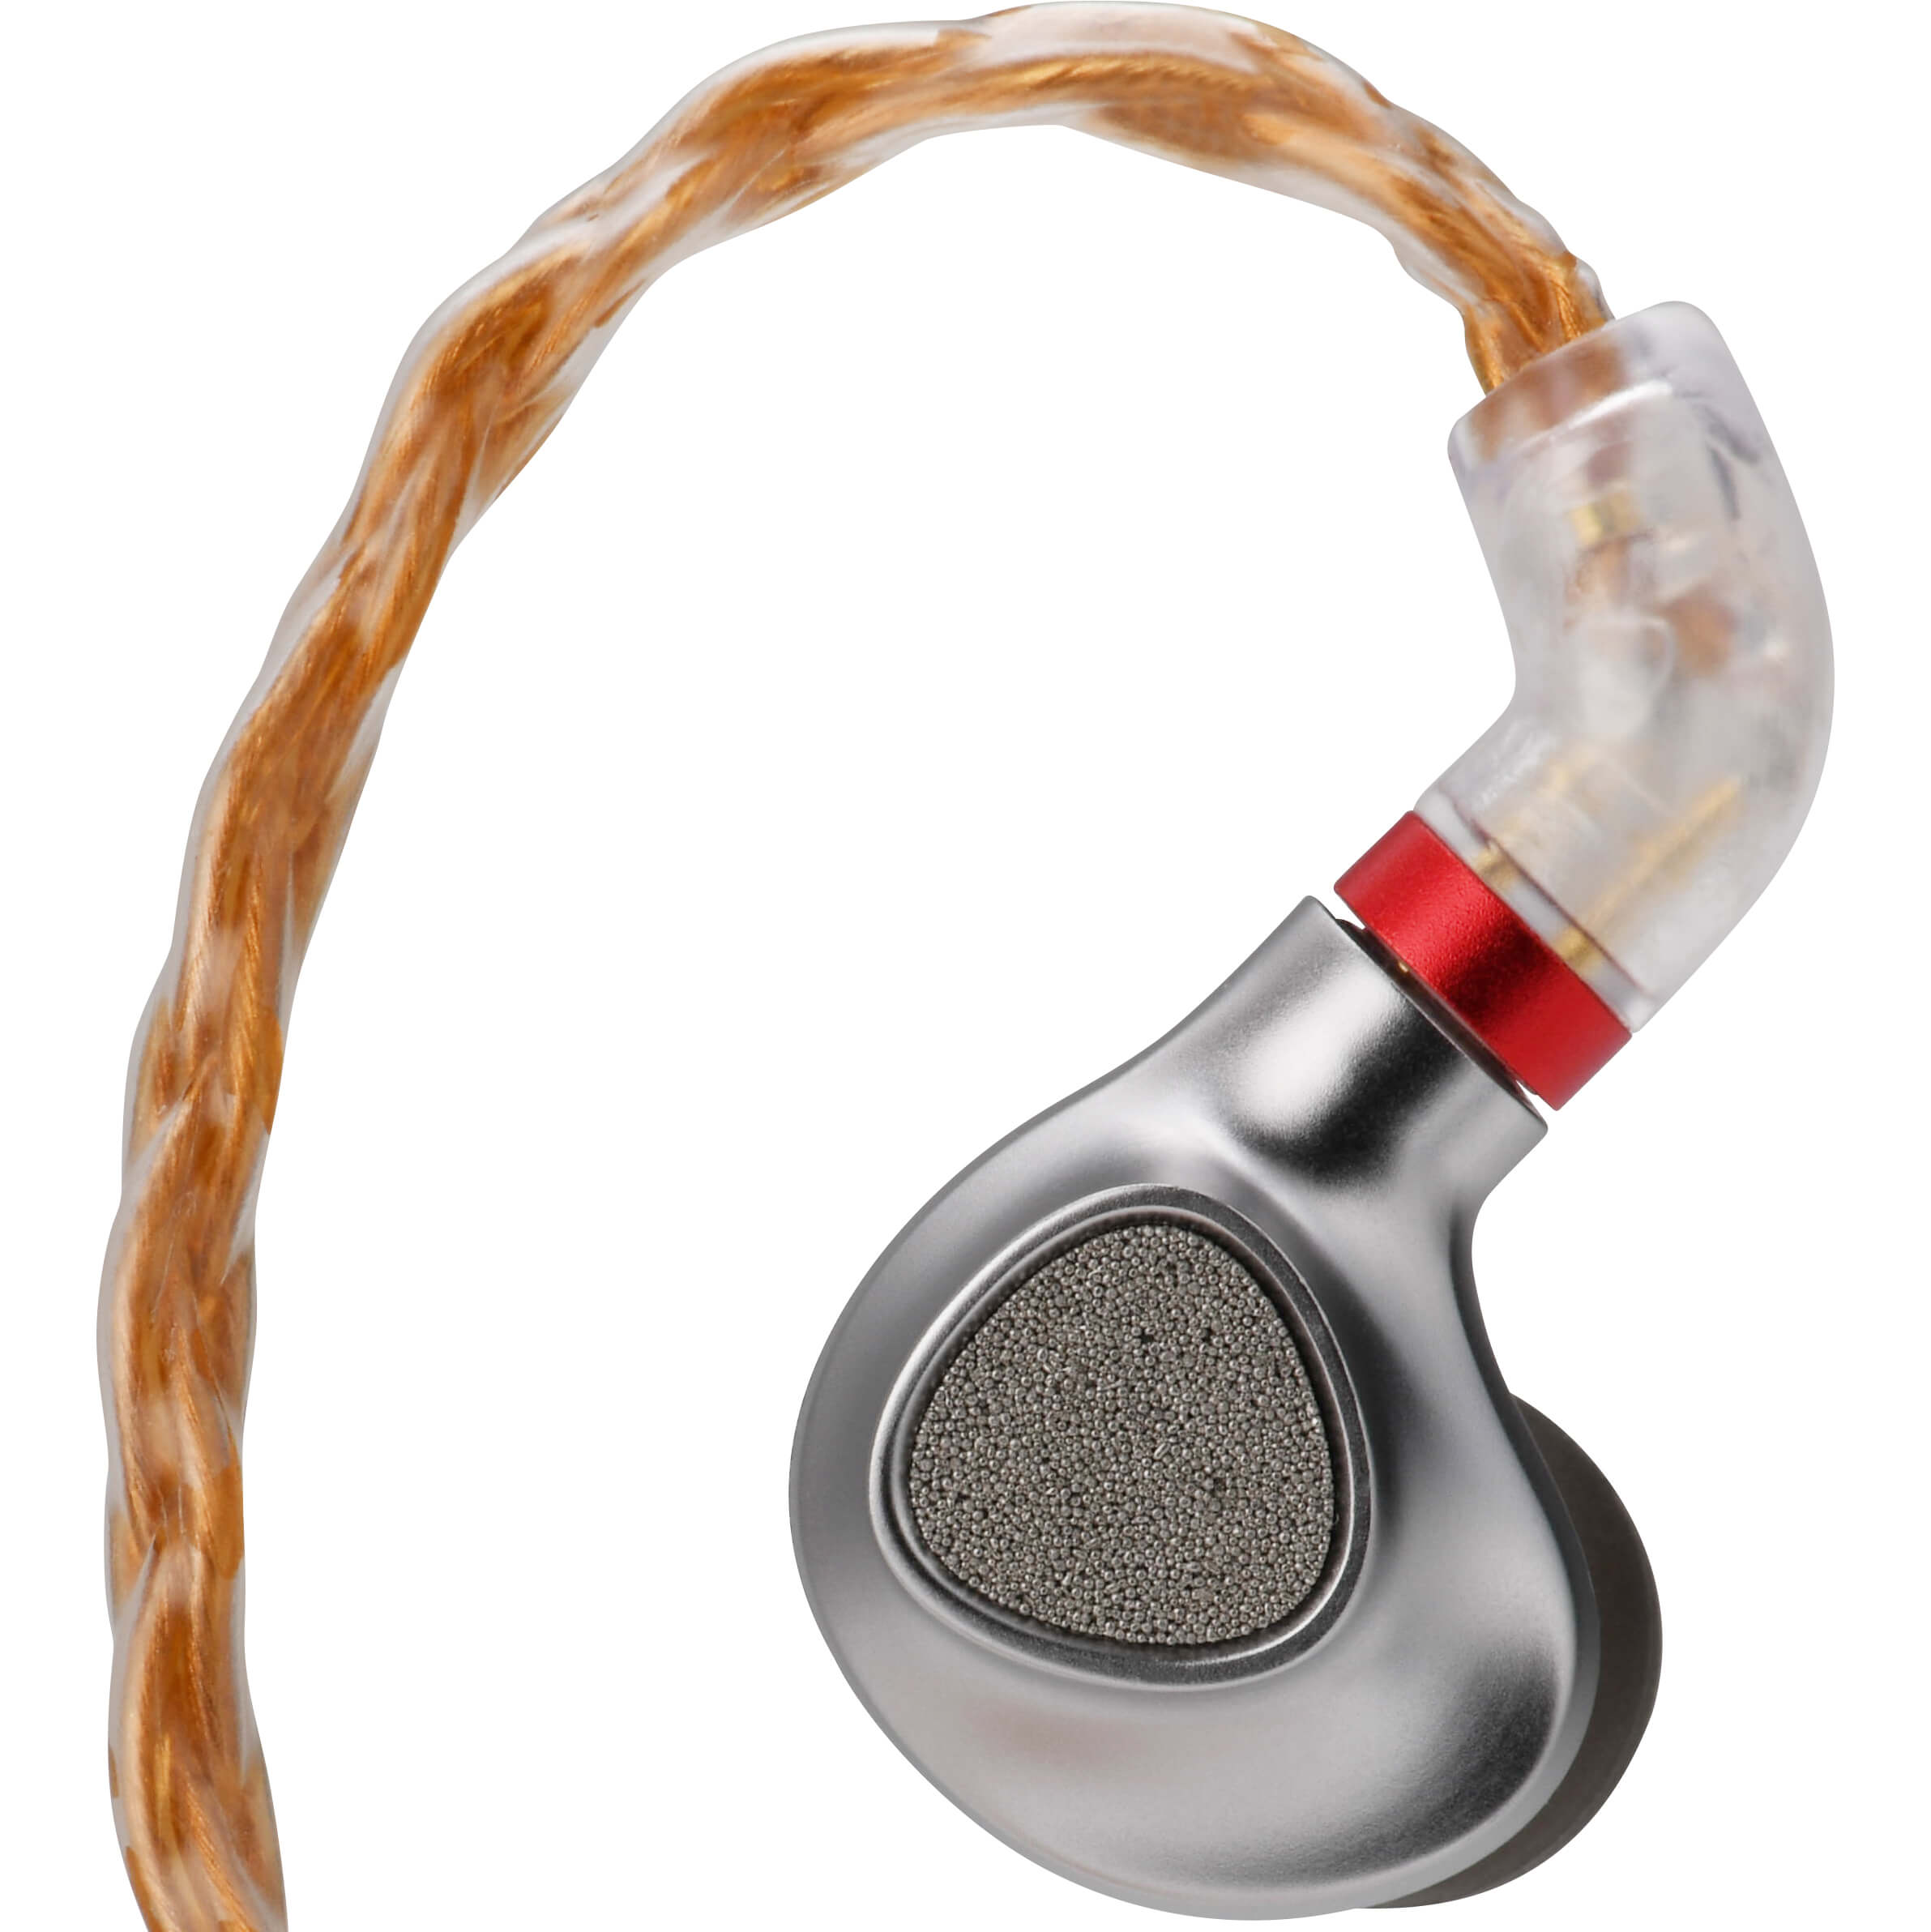 Buy Tin HiFi P2 Earphone at HiFiNage in India with warranty.